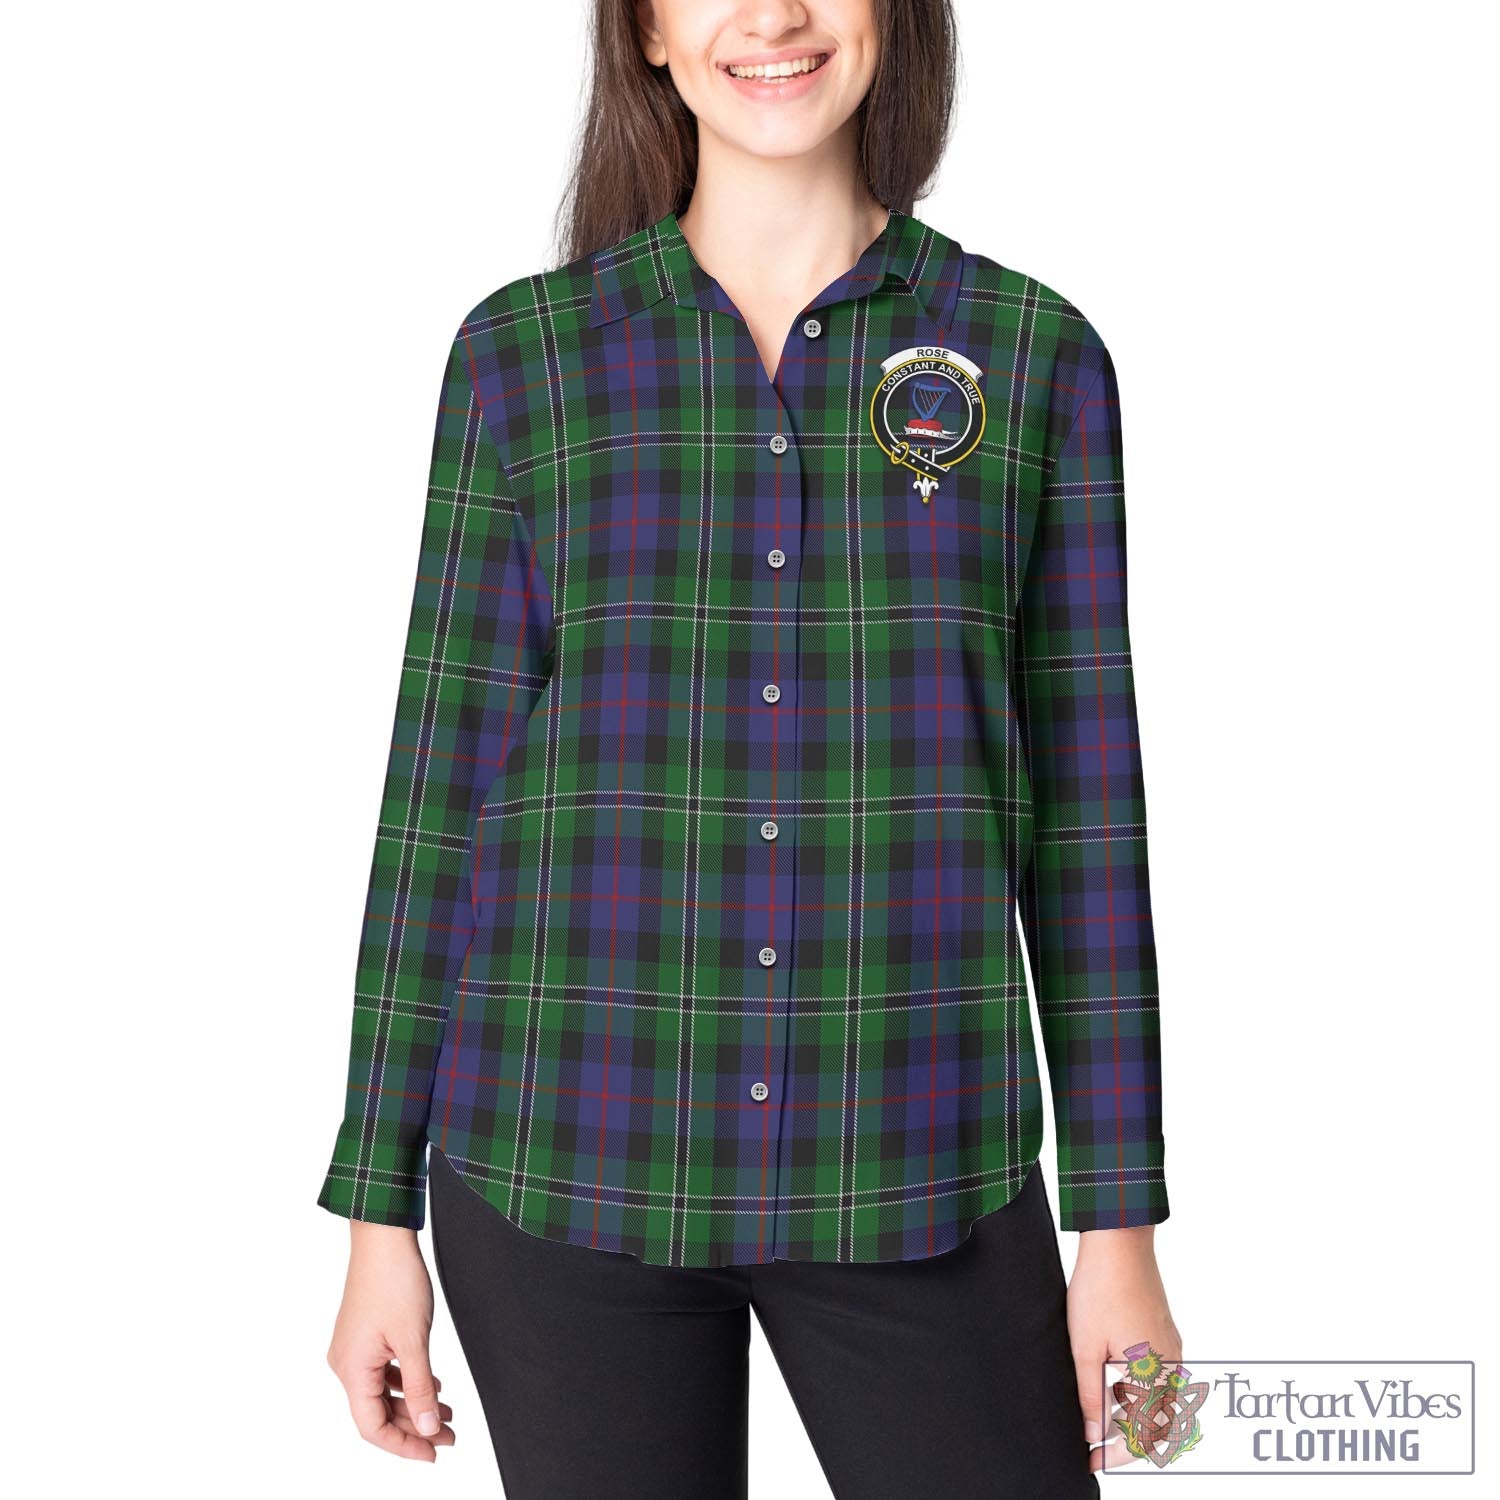 Tartan Vibes Clothing Rose Hunting Tartan Womens Casual Shirt with Family Crest